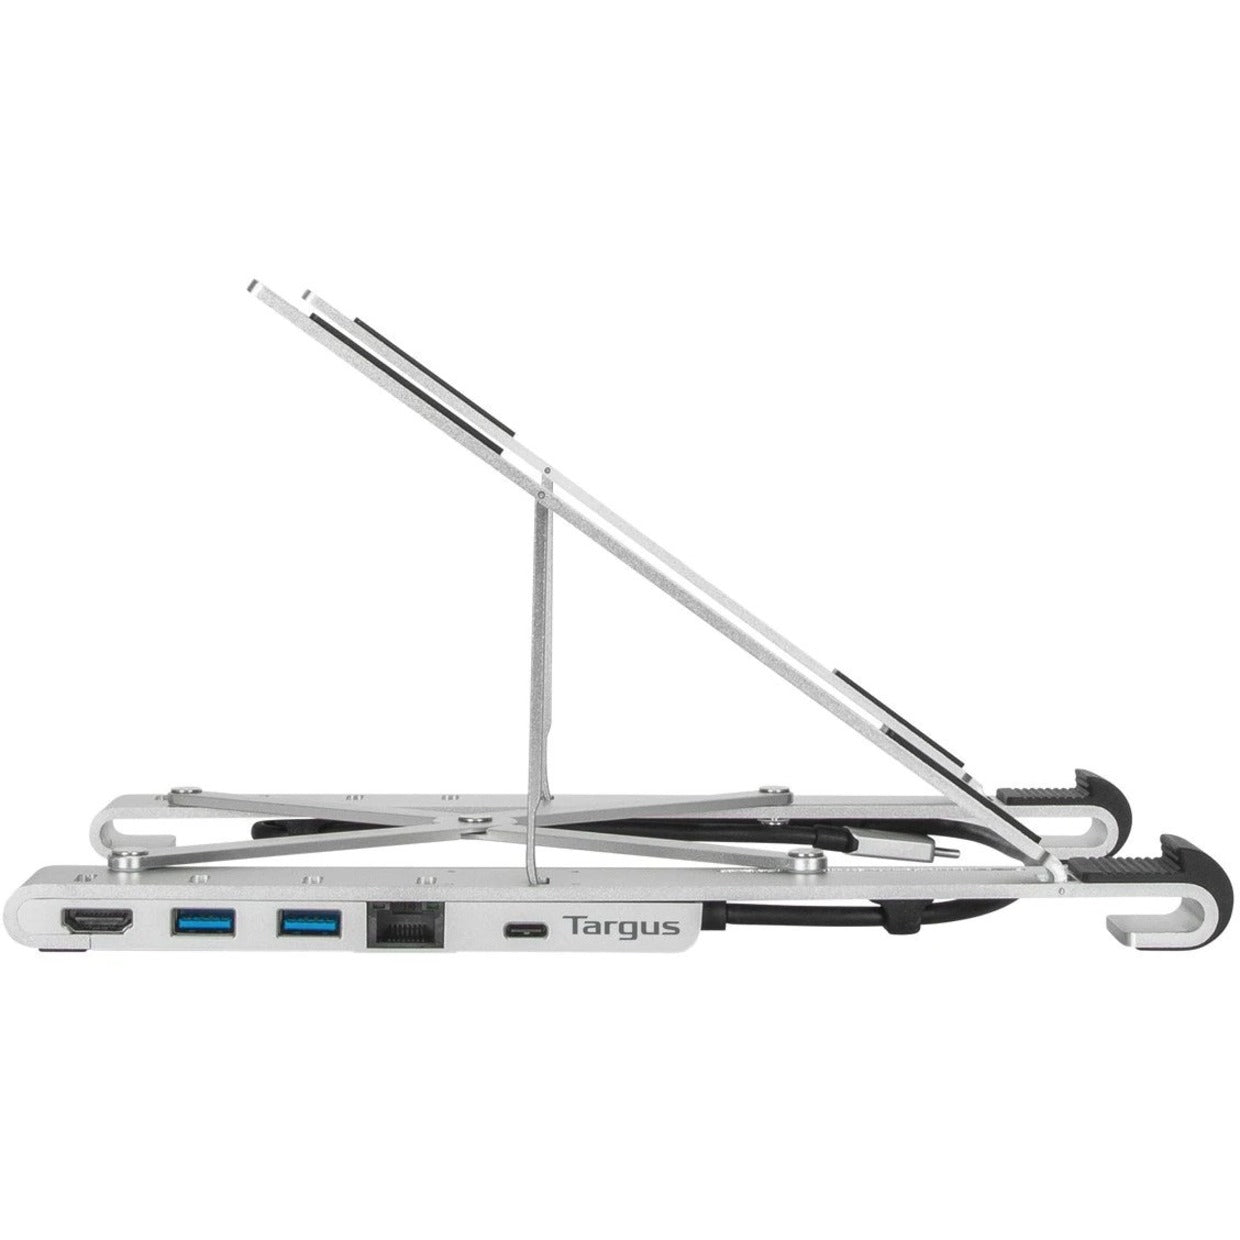 Targus AWU100005GL Portable Stand with Integrated Dock, 4K Screen Mode Supported, Gigabit Ethernet, Silver